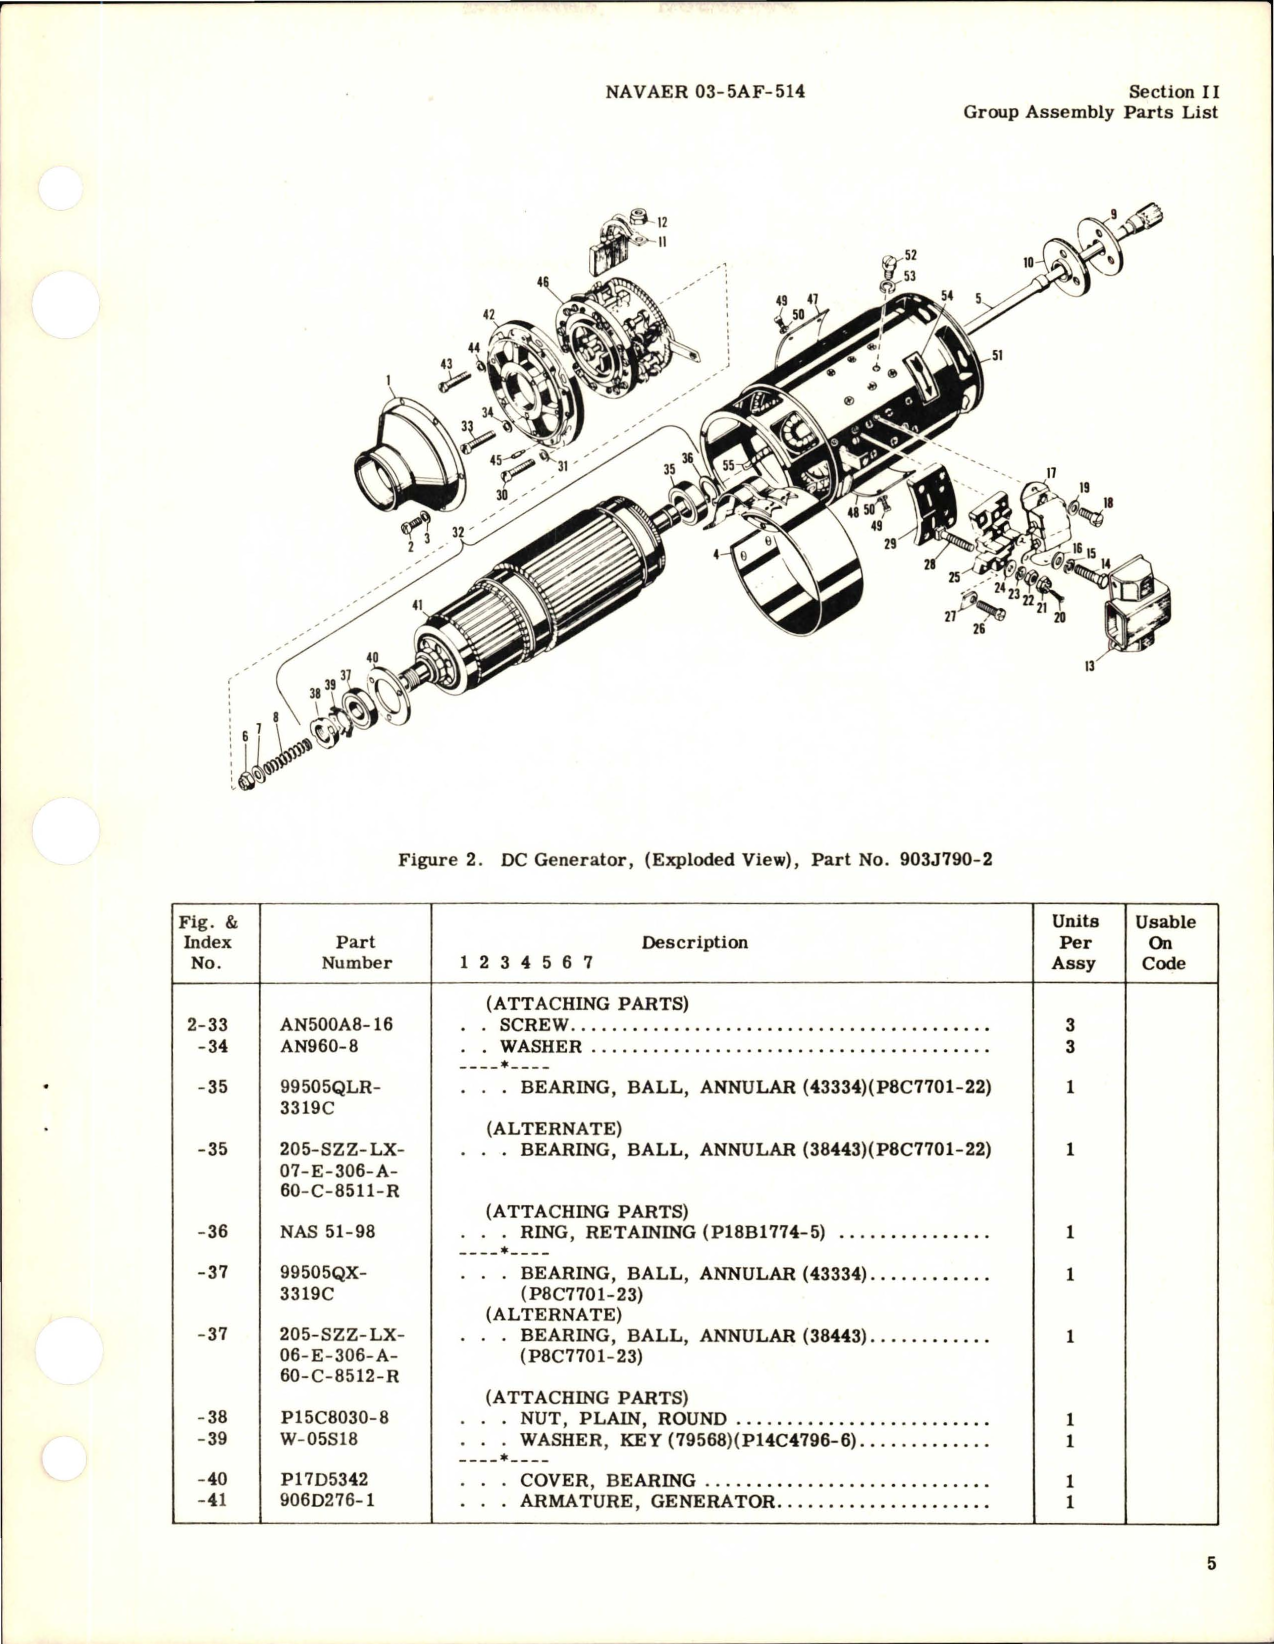 Sample page 7 from AirCorps Library document: Illustrated Parts Breakdown for DC Generator - Part 903J790-2